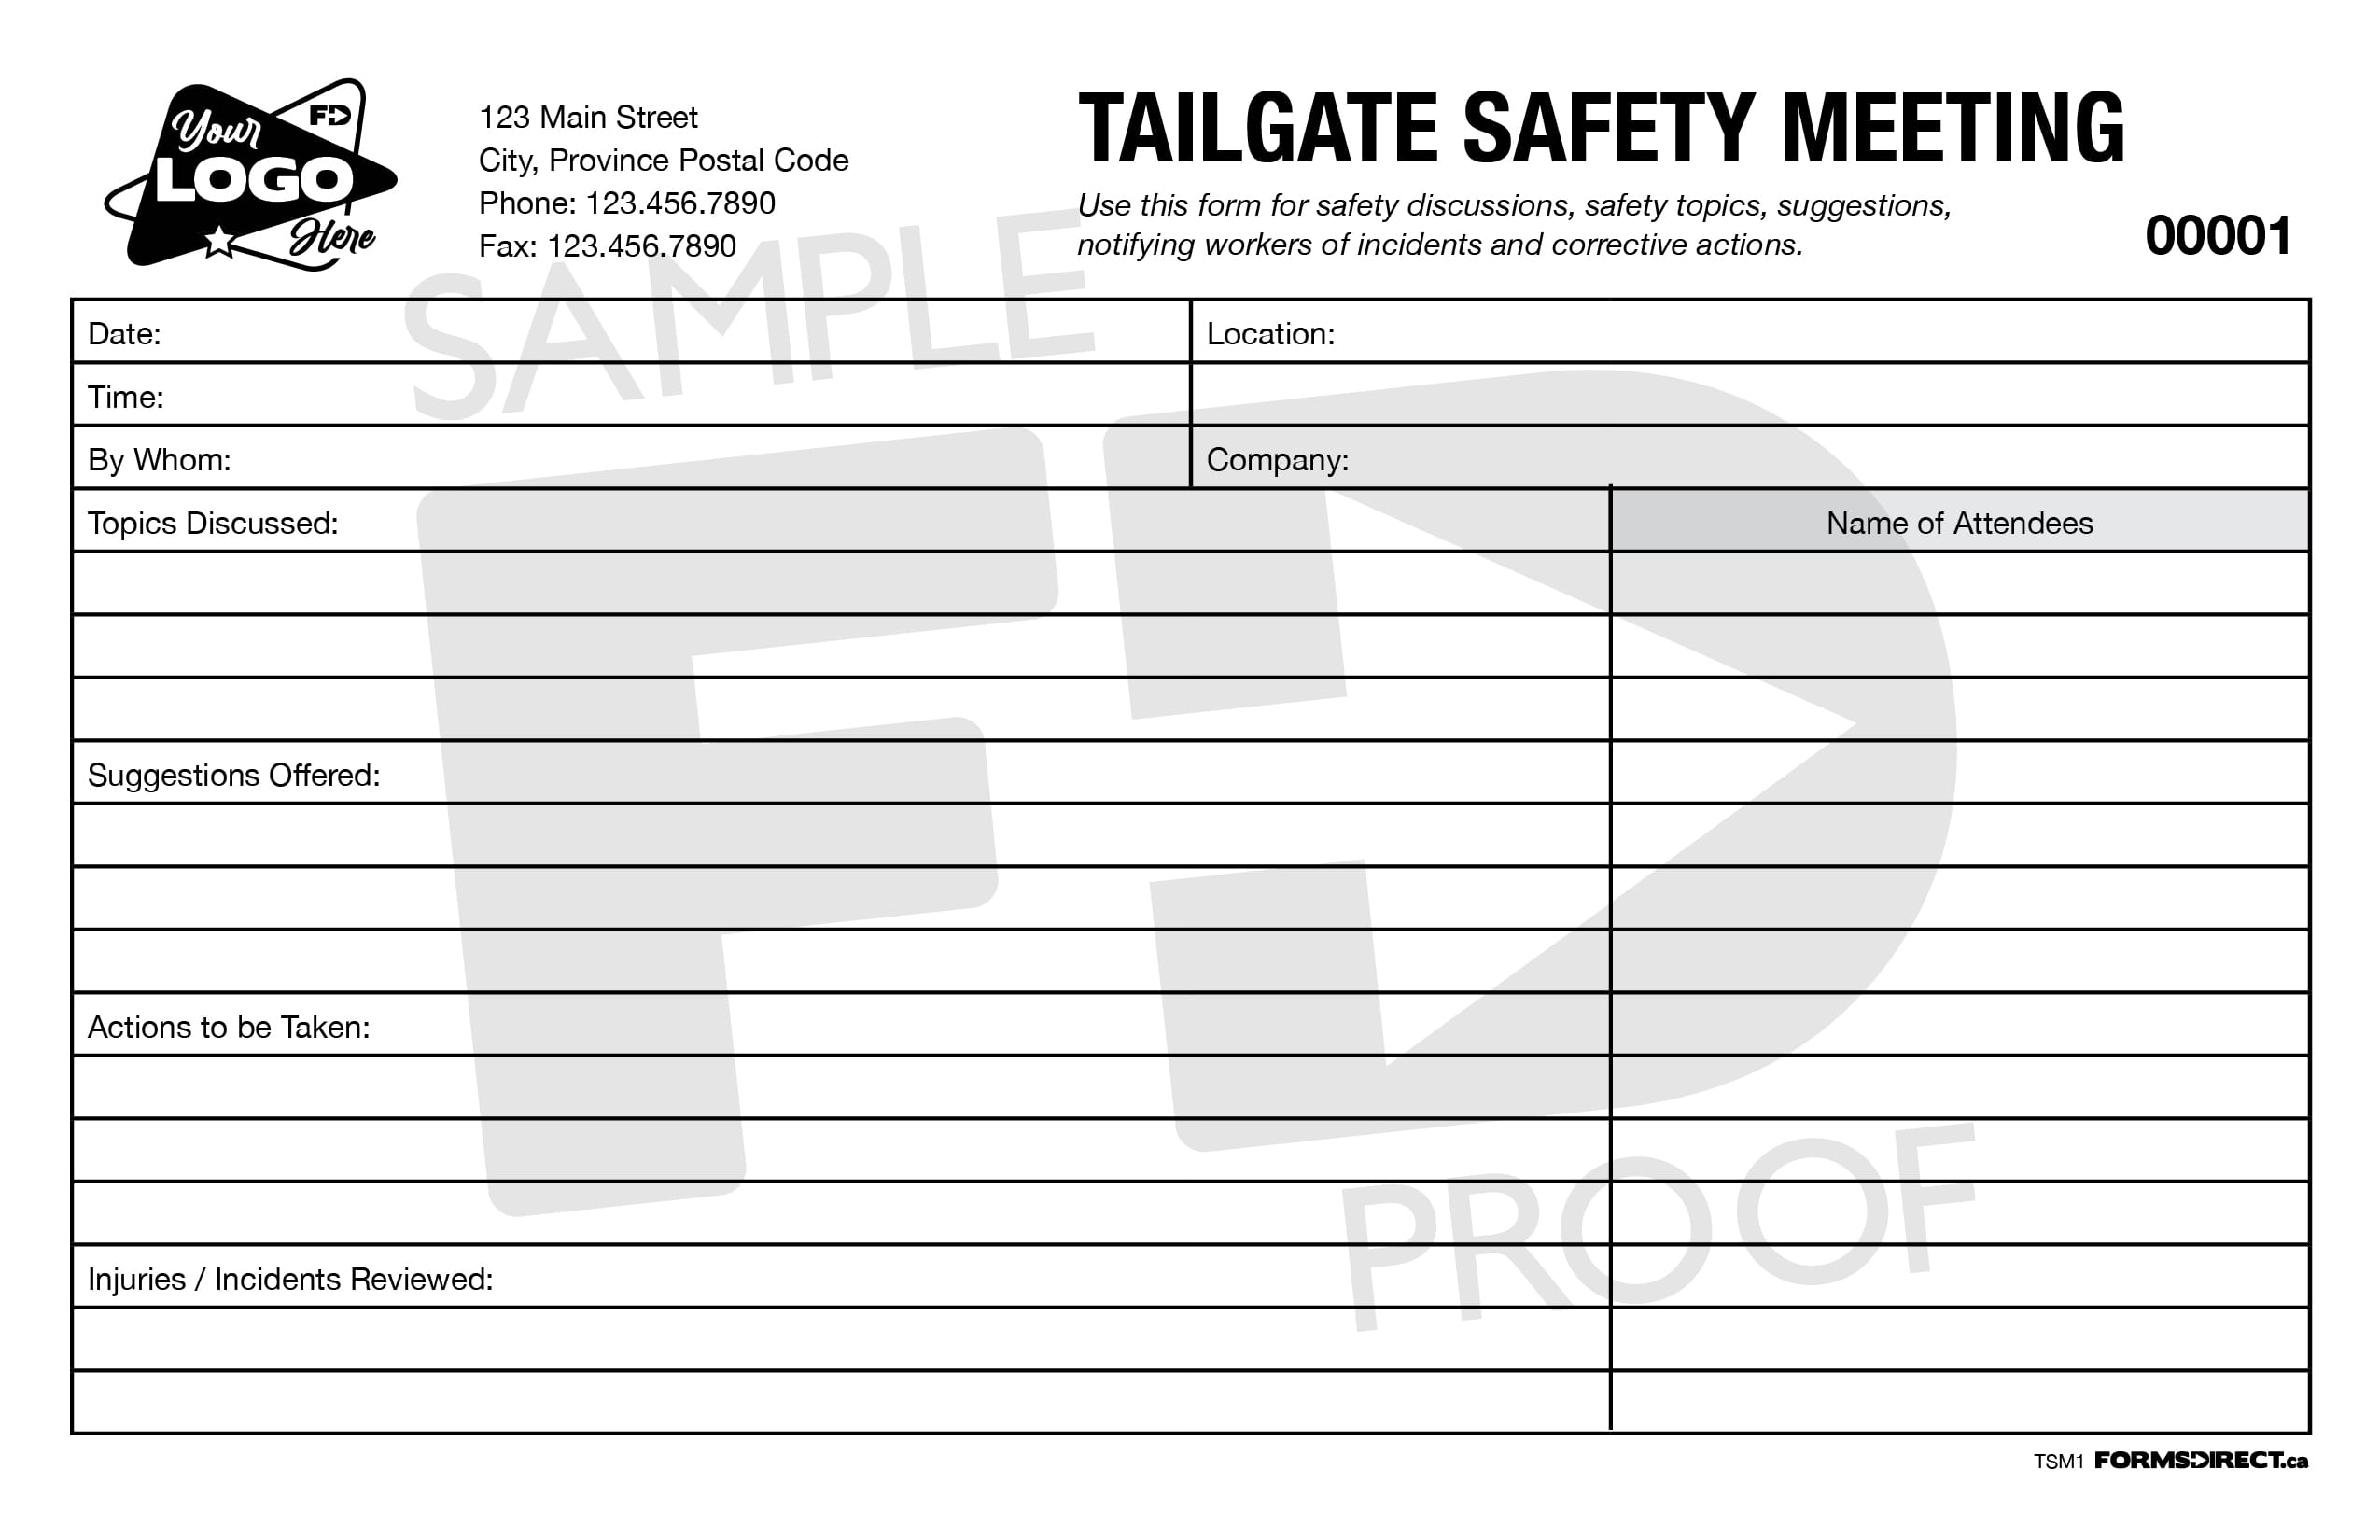 tailgate-safety-meeting-tsm1-custom-form-template-forms-direct